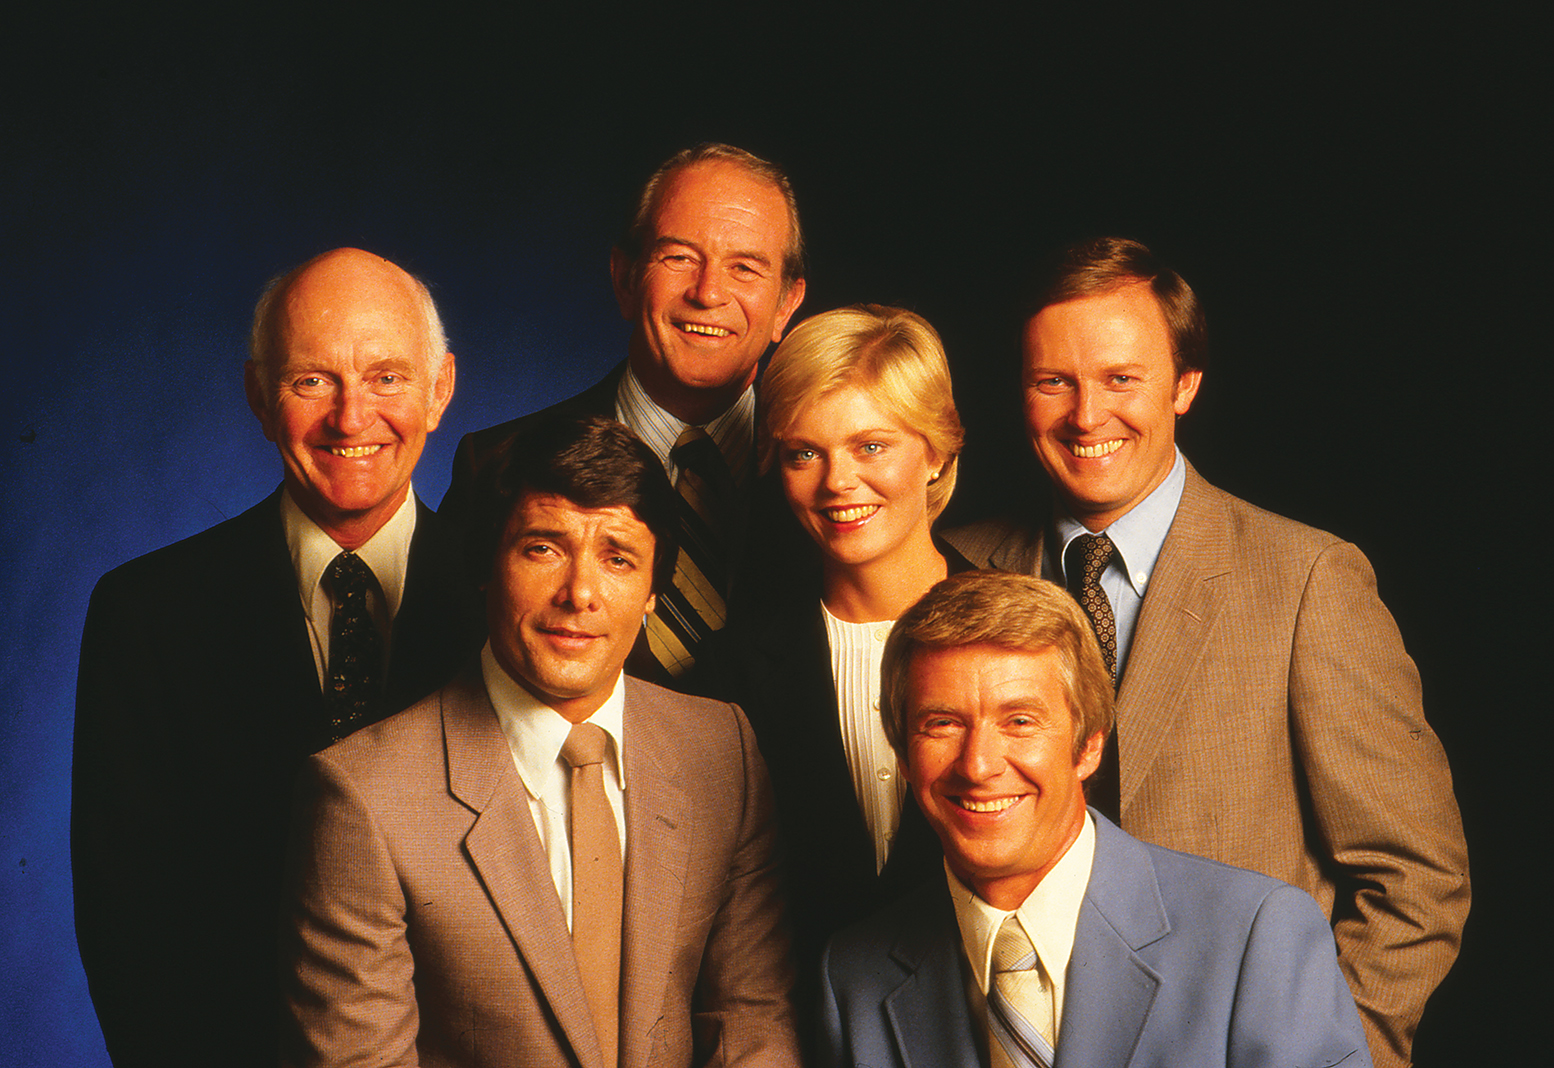 Pat Miles was part of the WCCO team in 1982